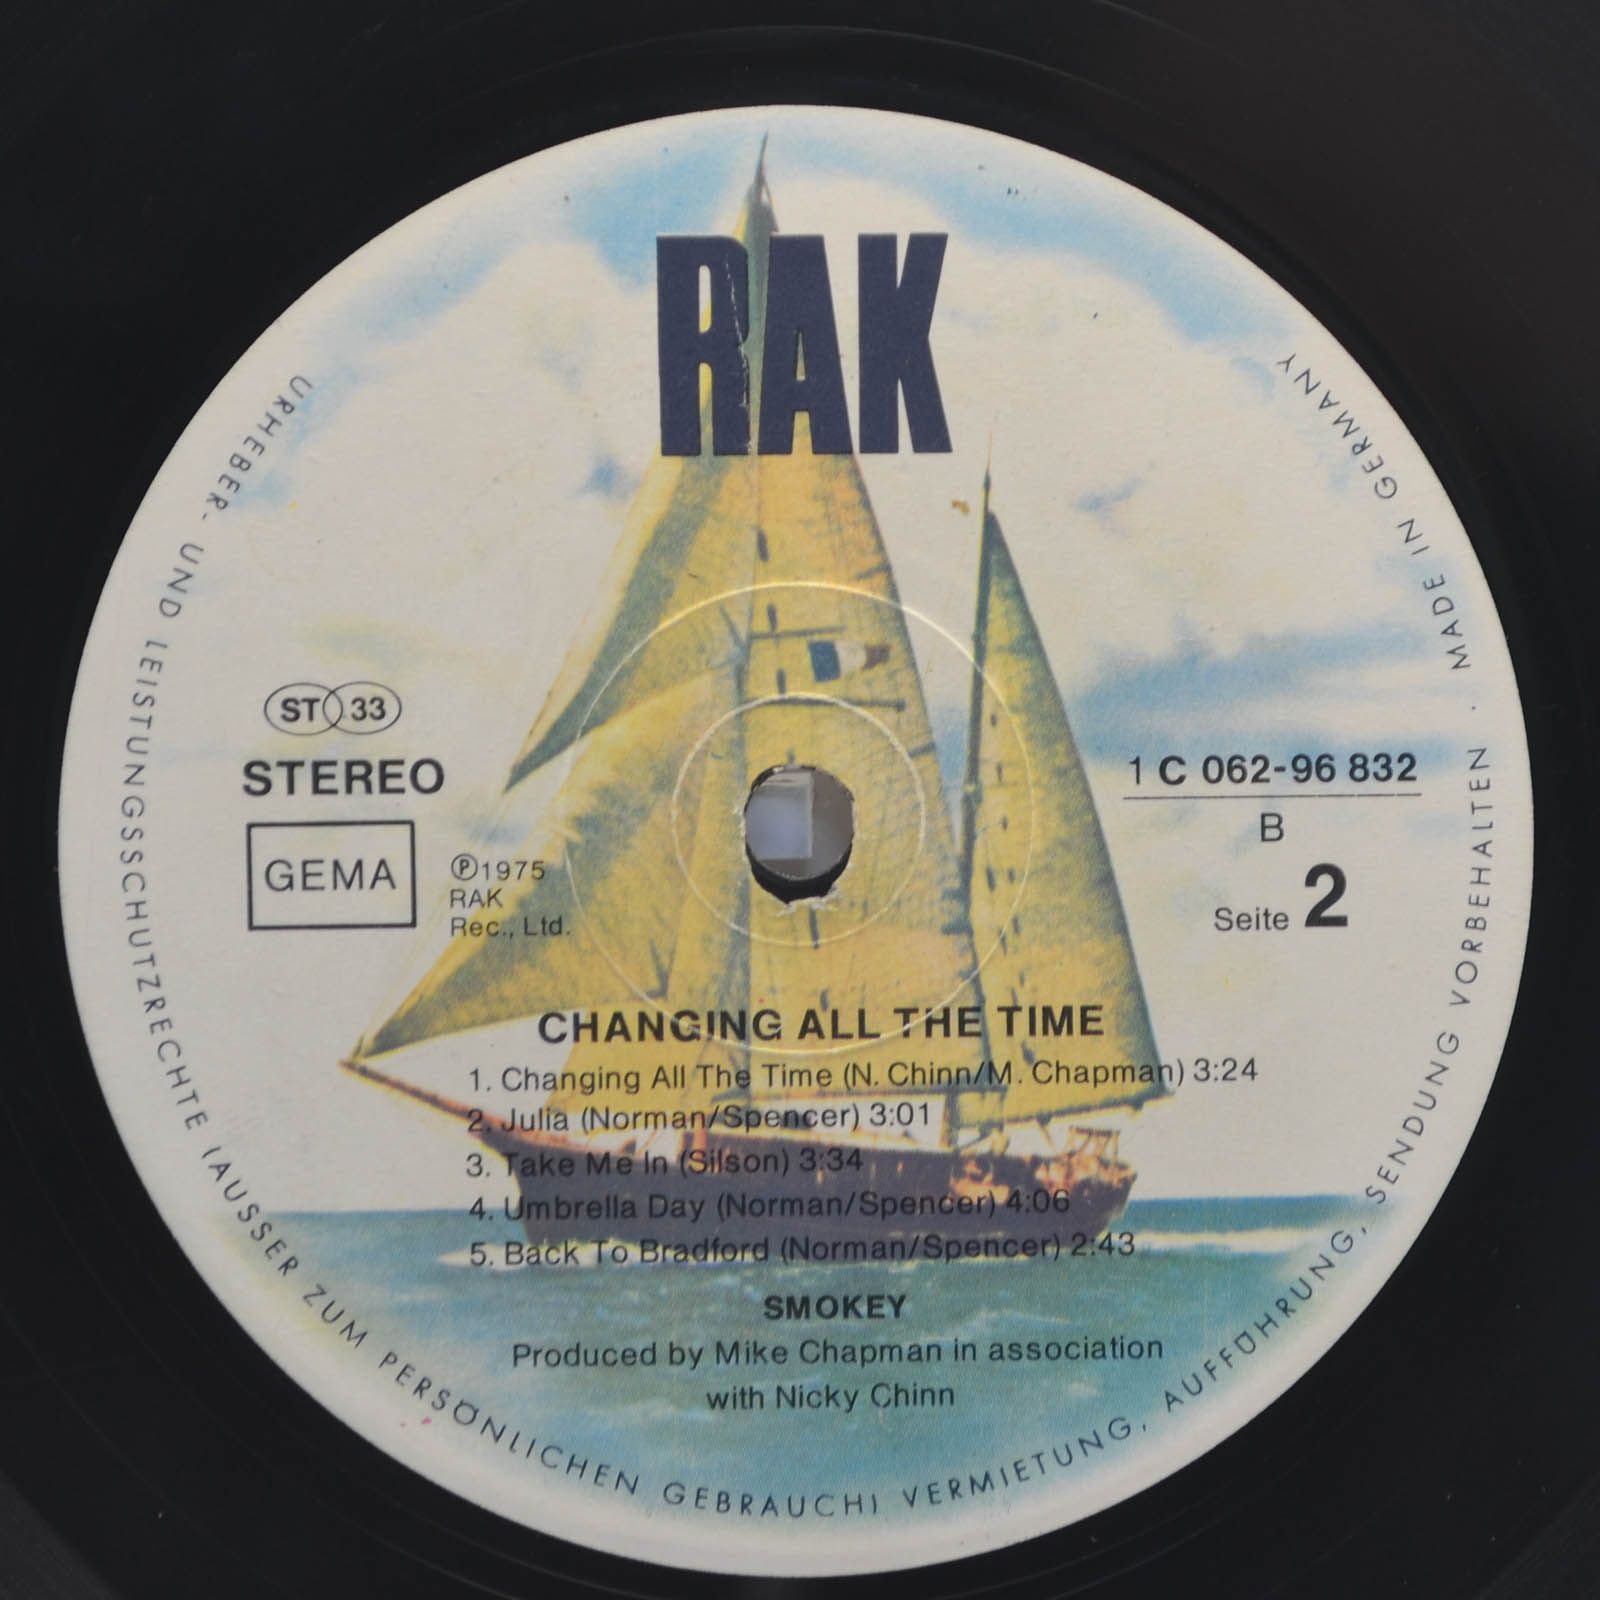 Smokey — Changing All The Time, 1975